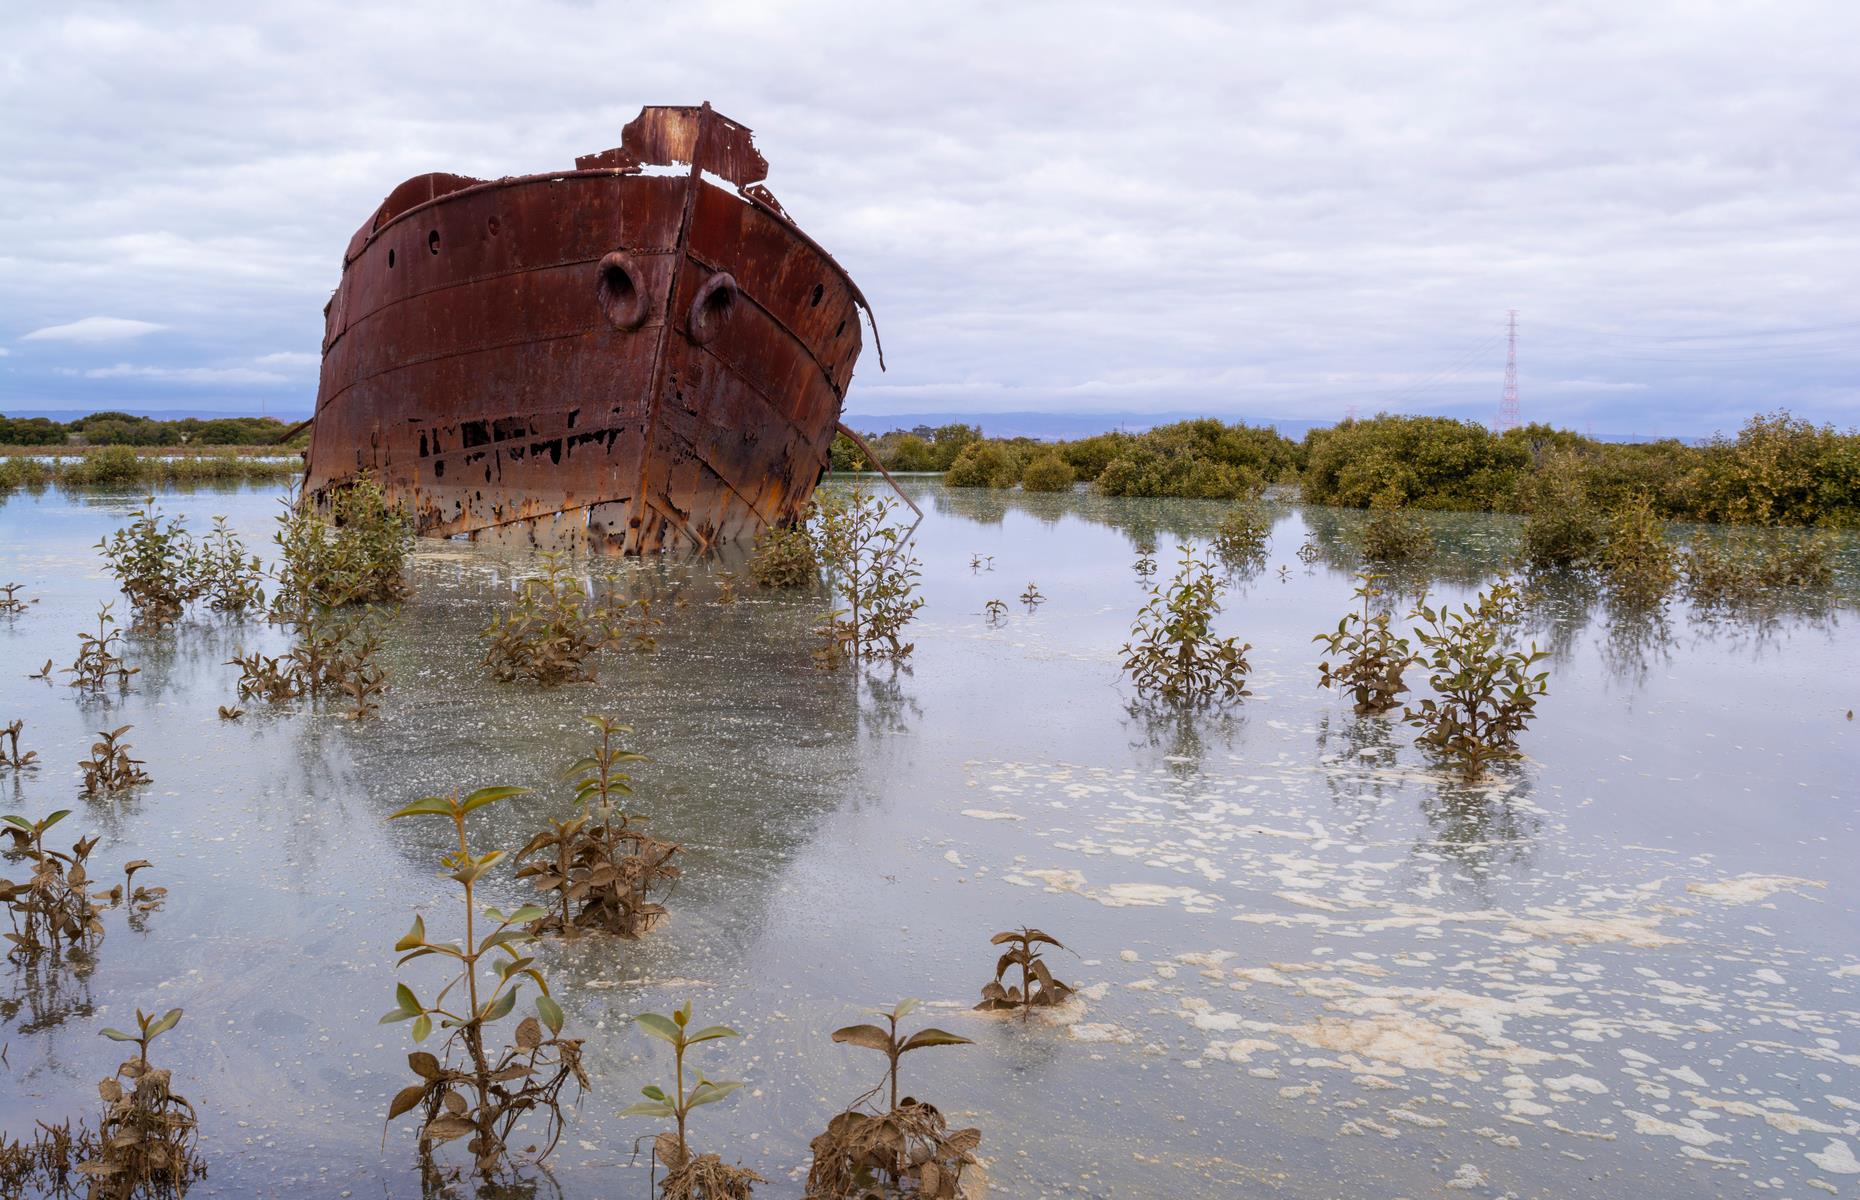 <p>Mangrove-dotted Mutton Cove Ships' Graveyard is another resting place whose wrecks are visible from land. Pictured here is the rusting Excelsior, peering from the backwaters of the Port River – it was a screw steamer built in 1897 and is now partially submerged in the marshland. It's one of 40 vessels left to rot.</p>